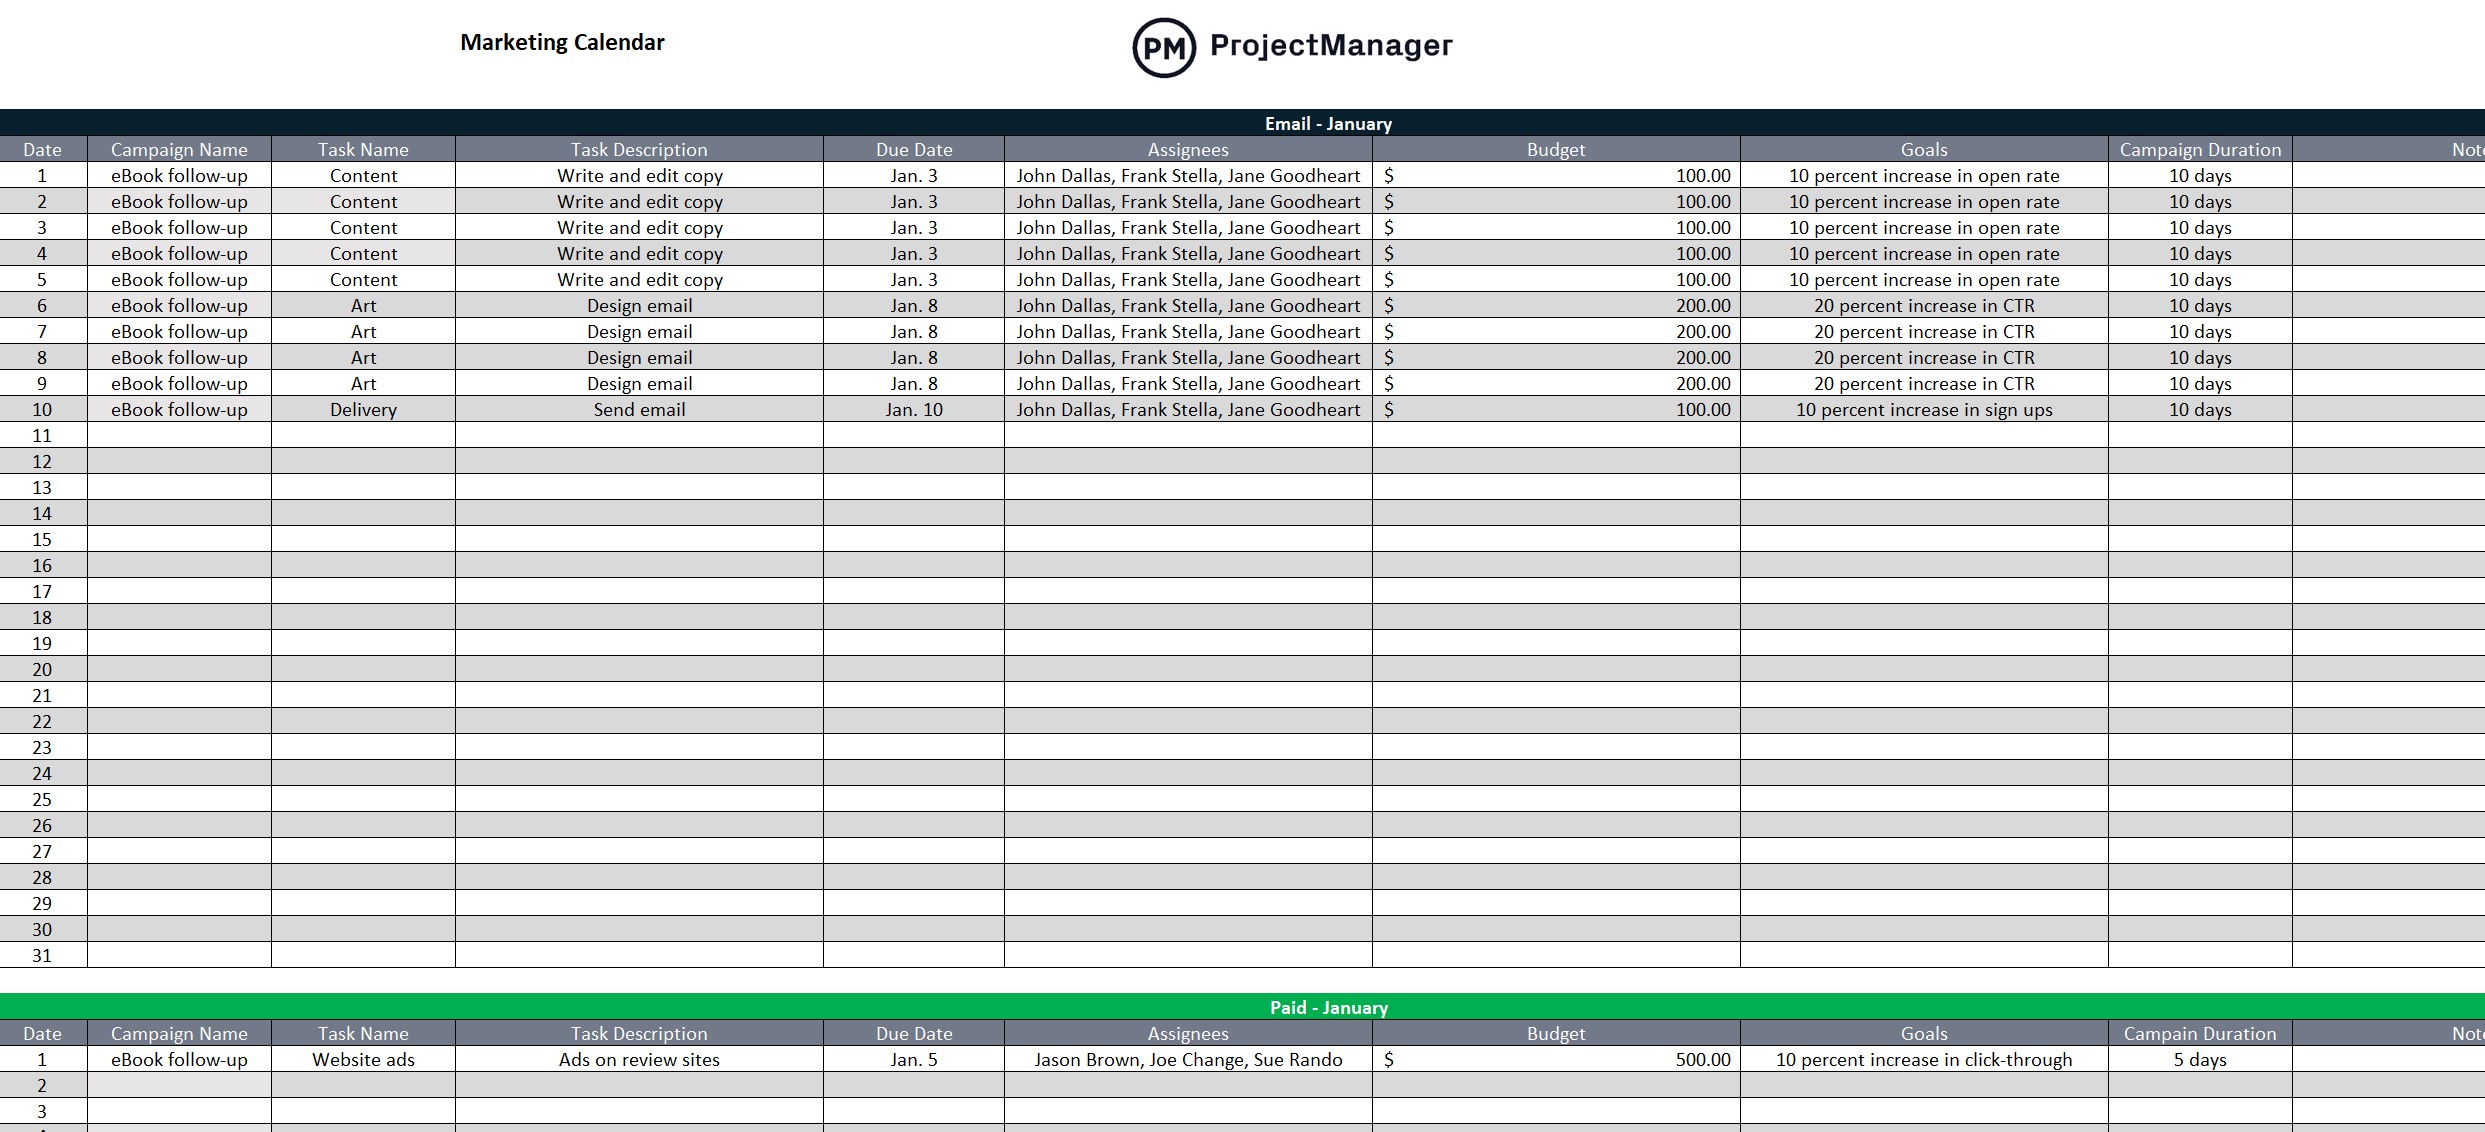 Free marketing calendar template in ProjectManager